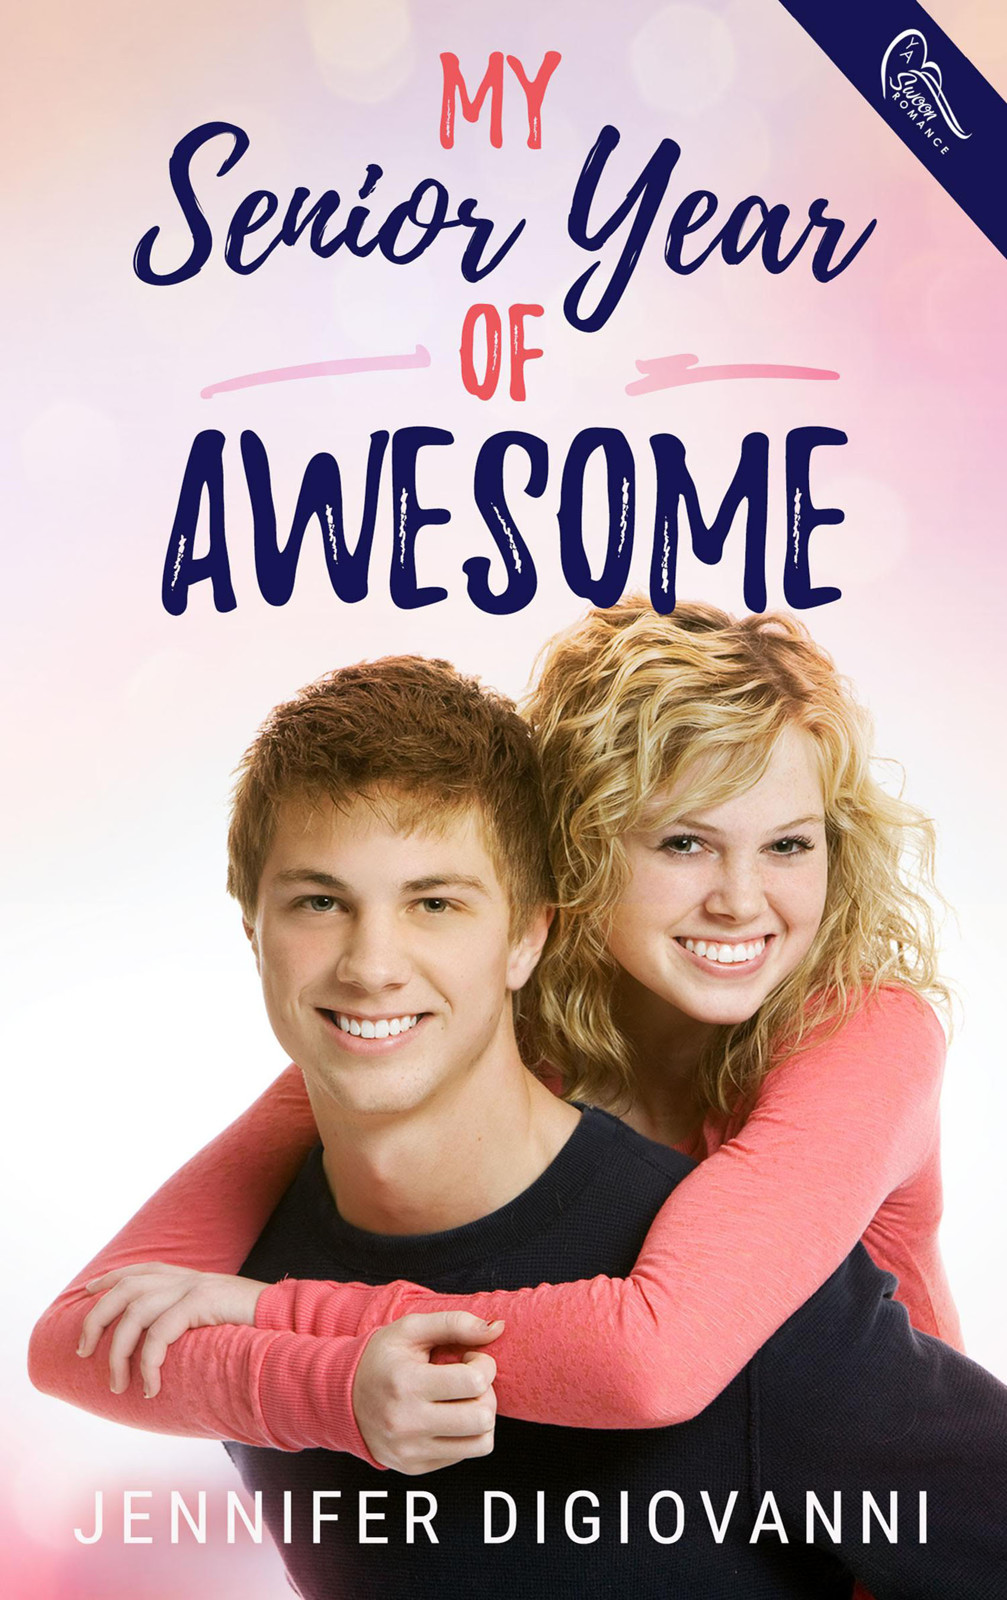 This image is the cover for the book My Senior Year of Awesome